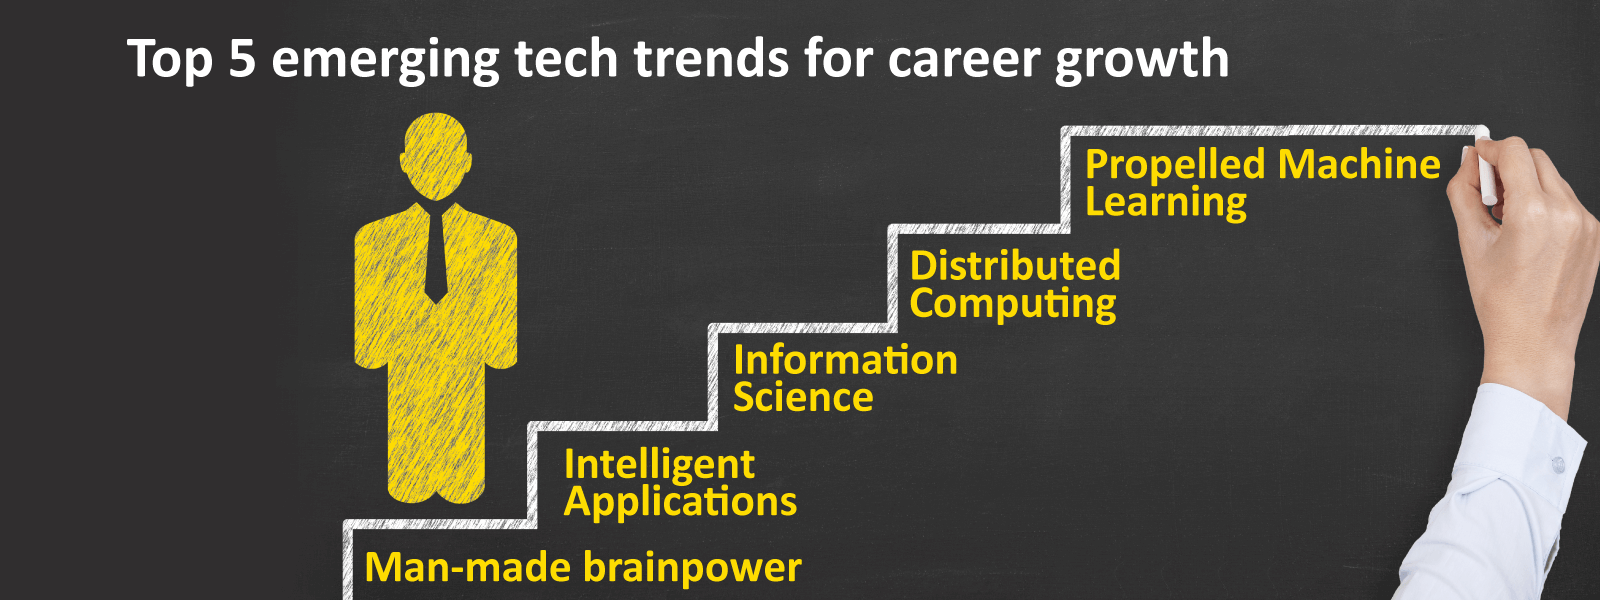 Top 5 emerging tech trends for career growth